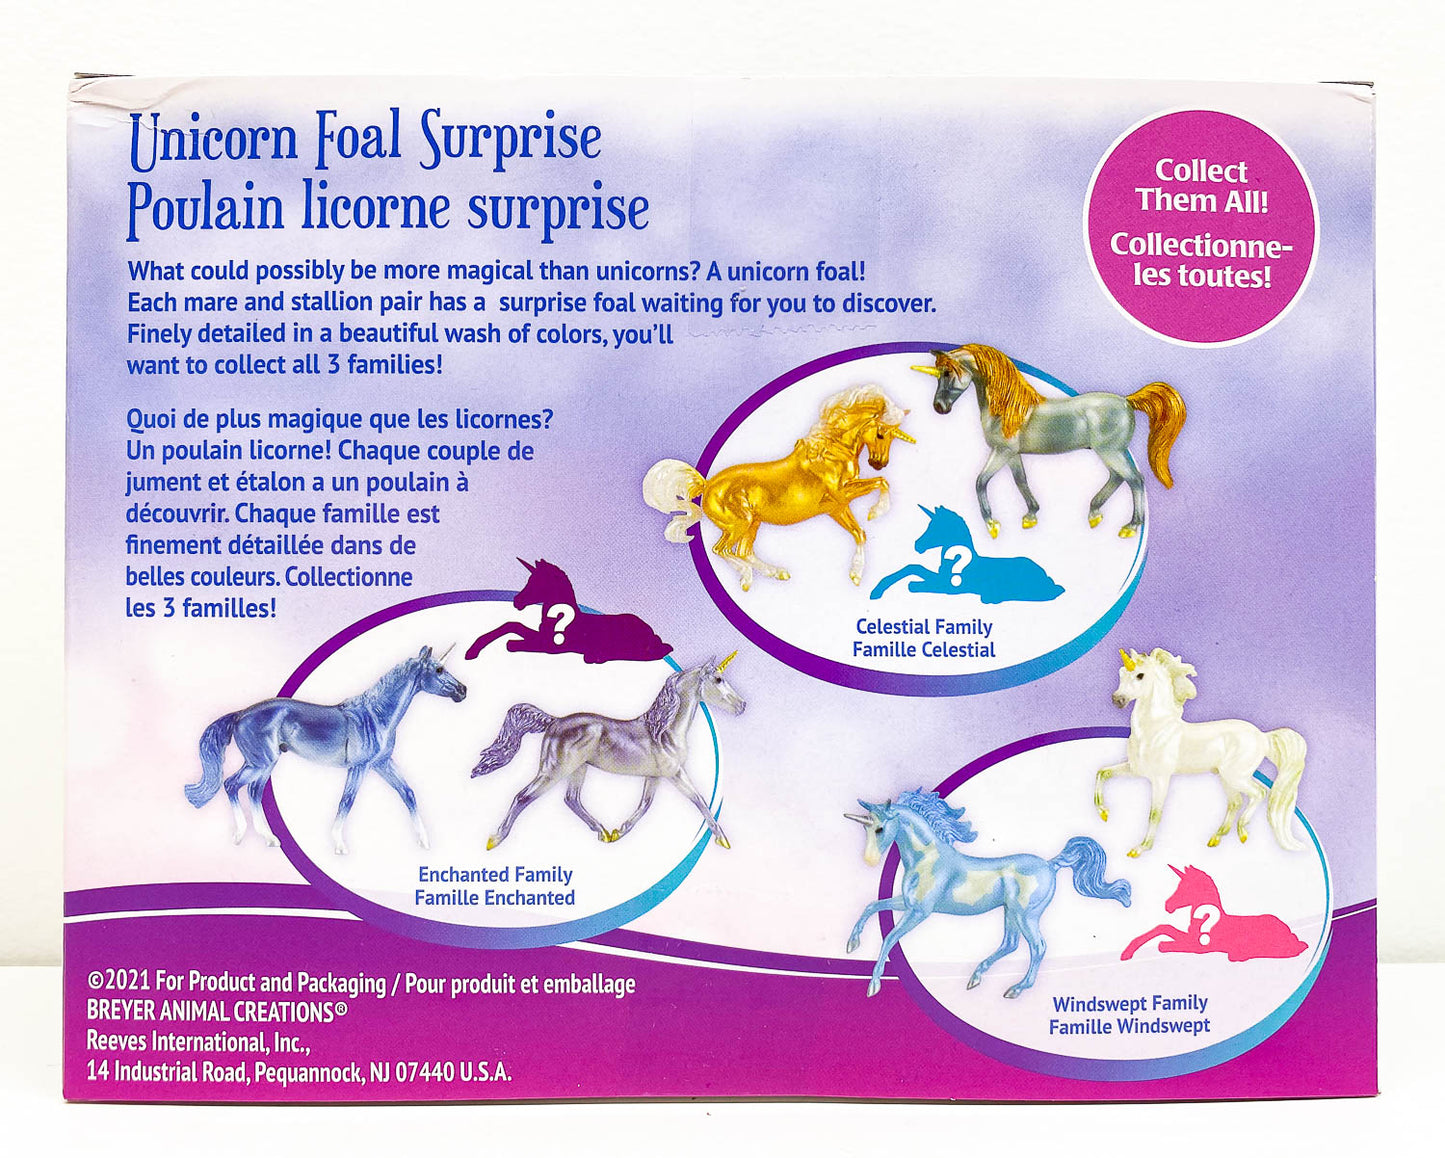 Mystery Unicorn Foal Surprise Family - Enchanted Family